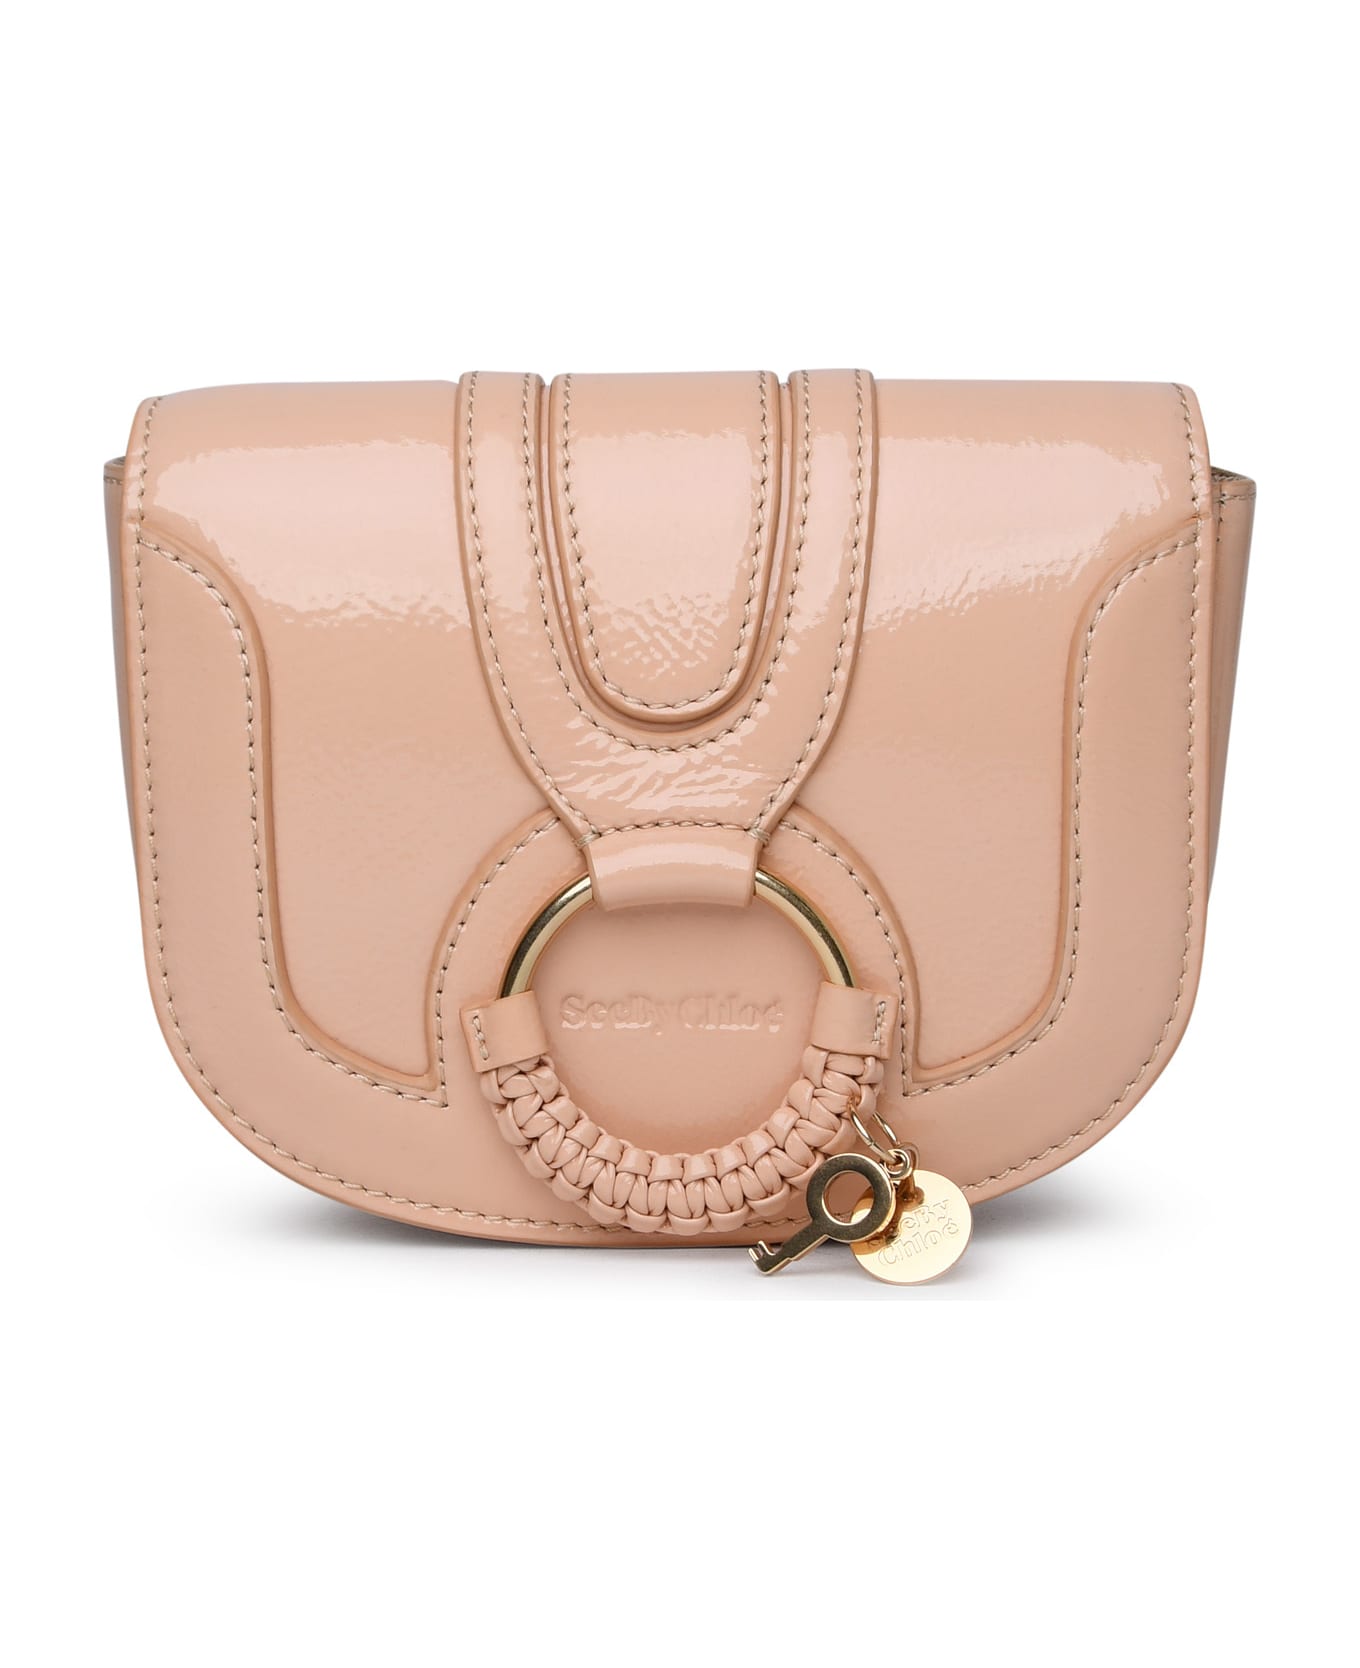 See by Chloé Pink Patent Leather Bag - Nude